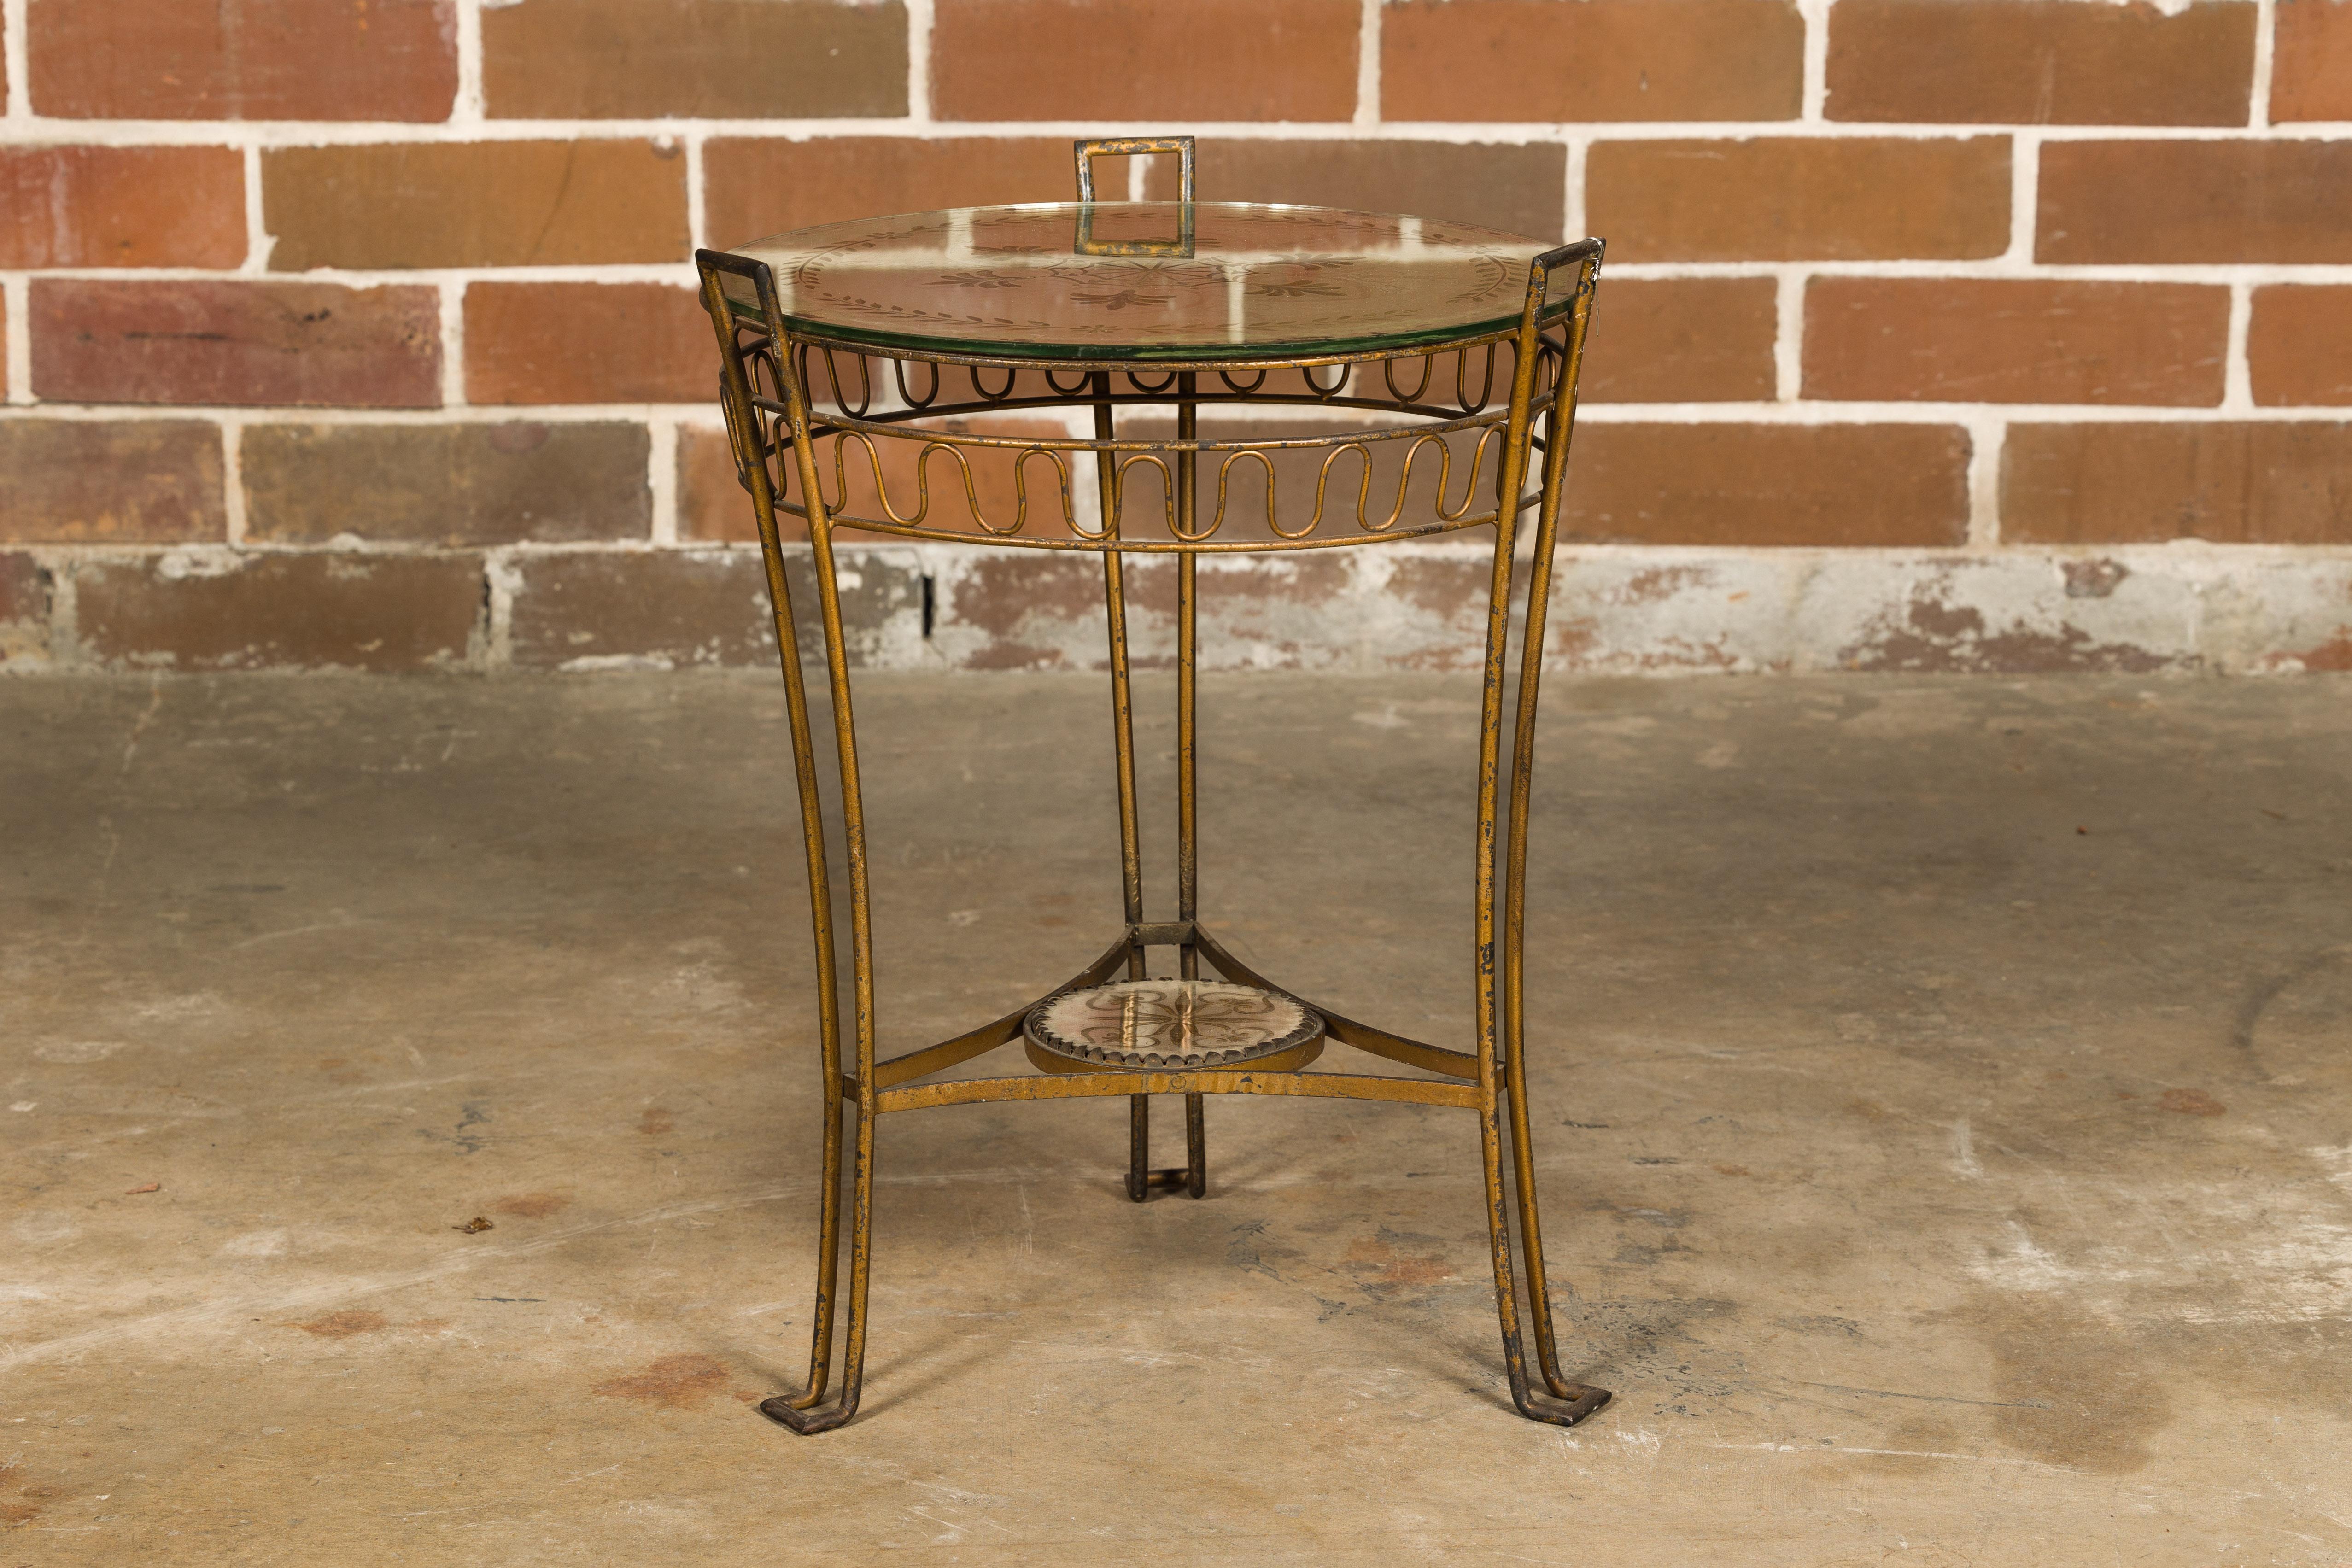 A French gilt iron side table from circa 1920 with etched mirrored top and low shelf. Step into the Parisian elegance of the 1920s with this exquisite French gilt iron side table, featuring an etched mirrored top, a petite low shelf, and three